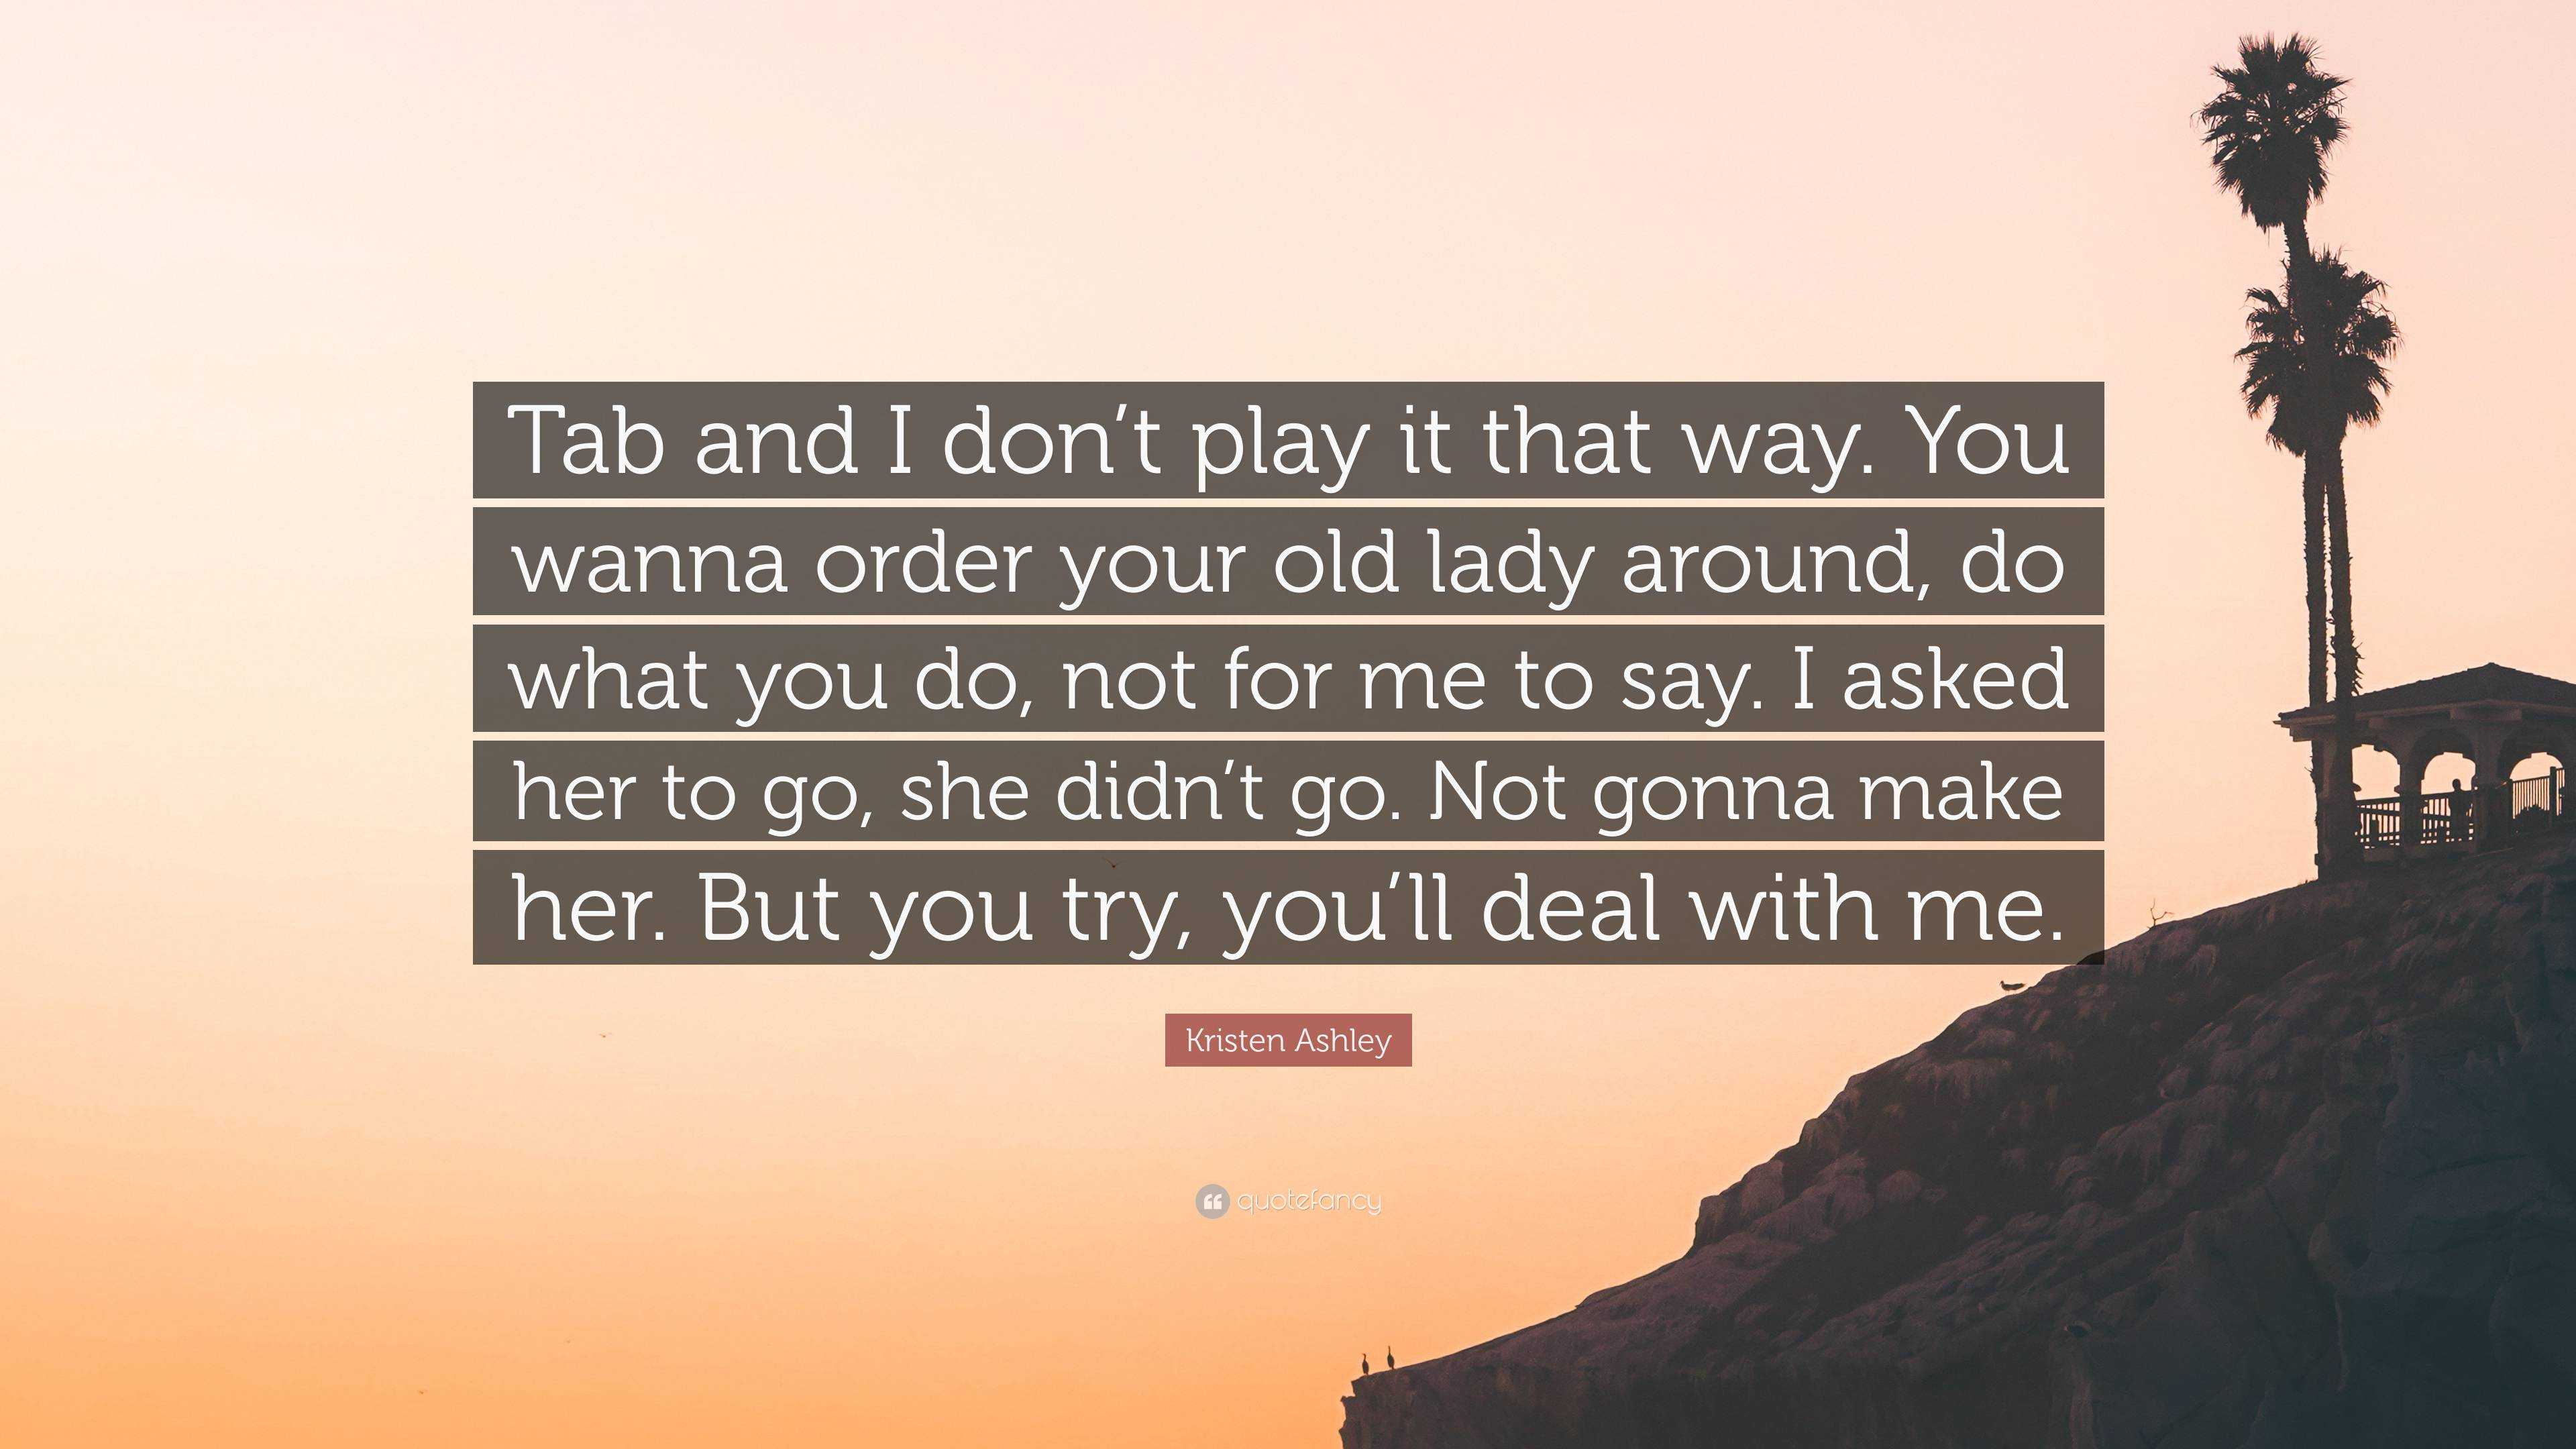 Kristen Ashley Quote: “Tab and I don't play it that way. You wanna